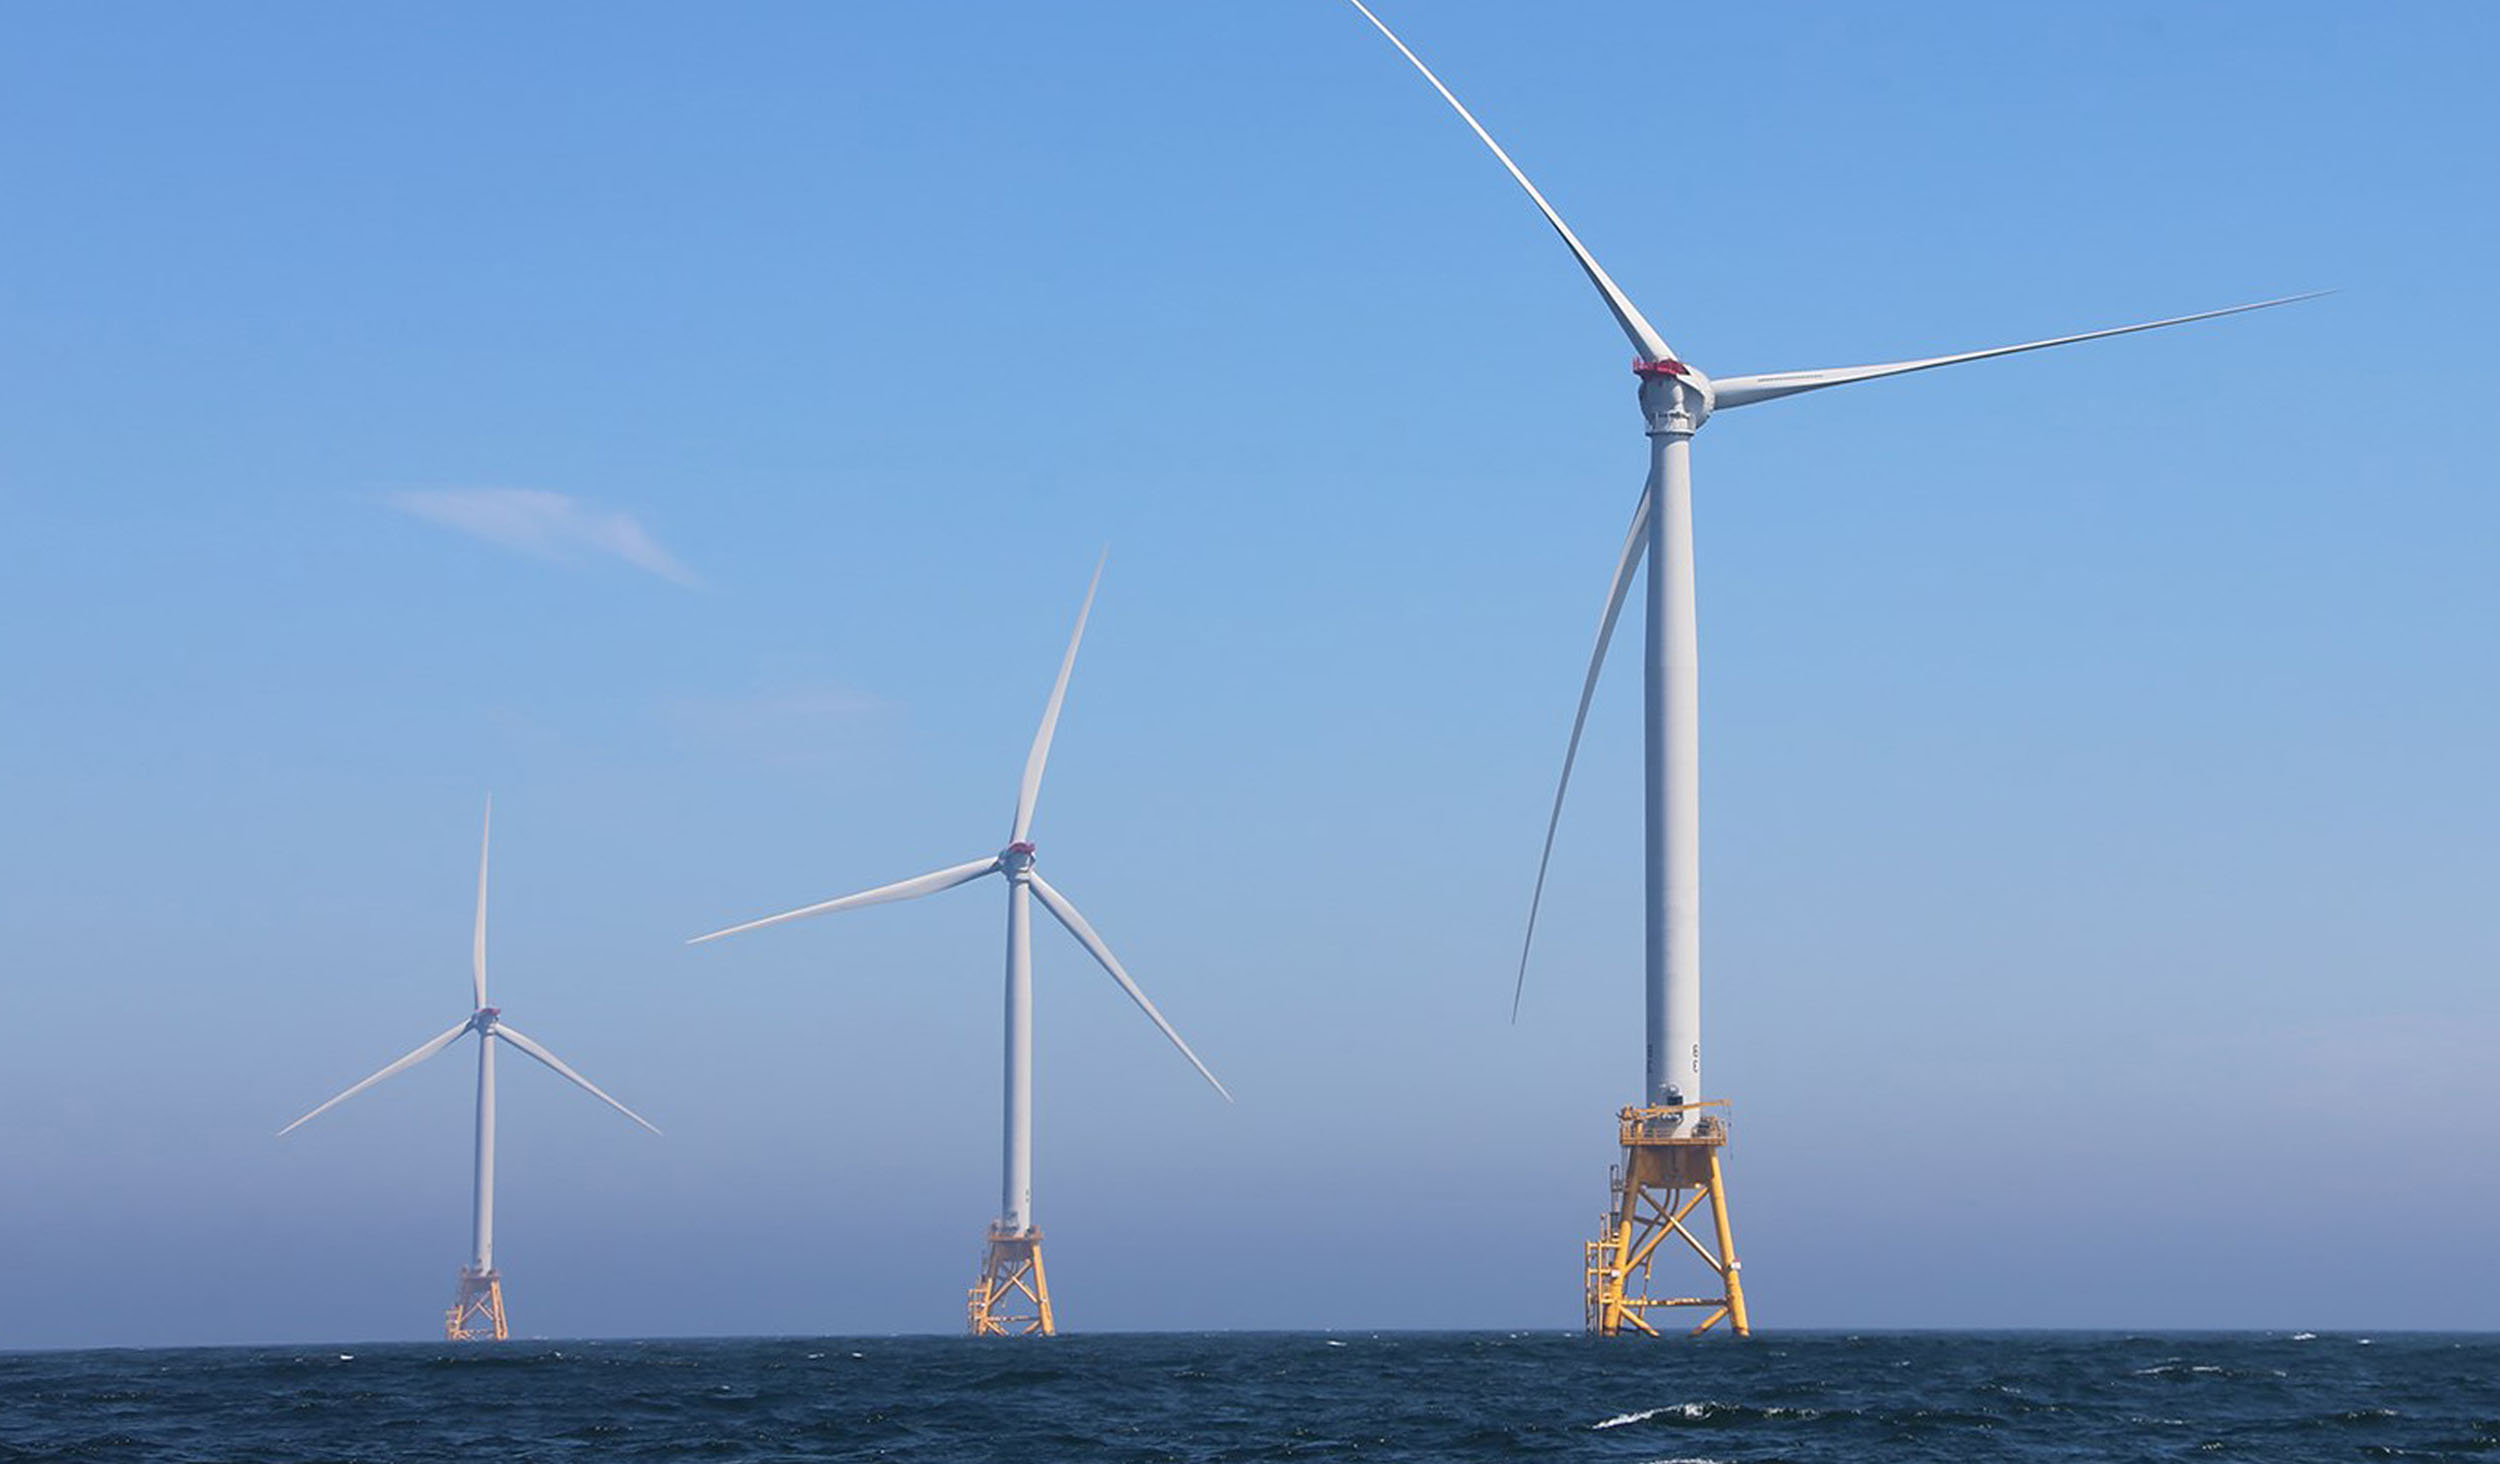 From Stantec ERA: Offshore wind energy is the green future of electricity generation